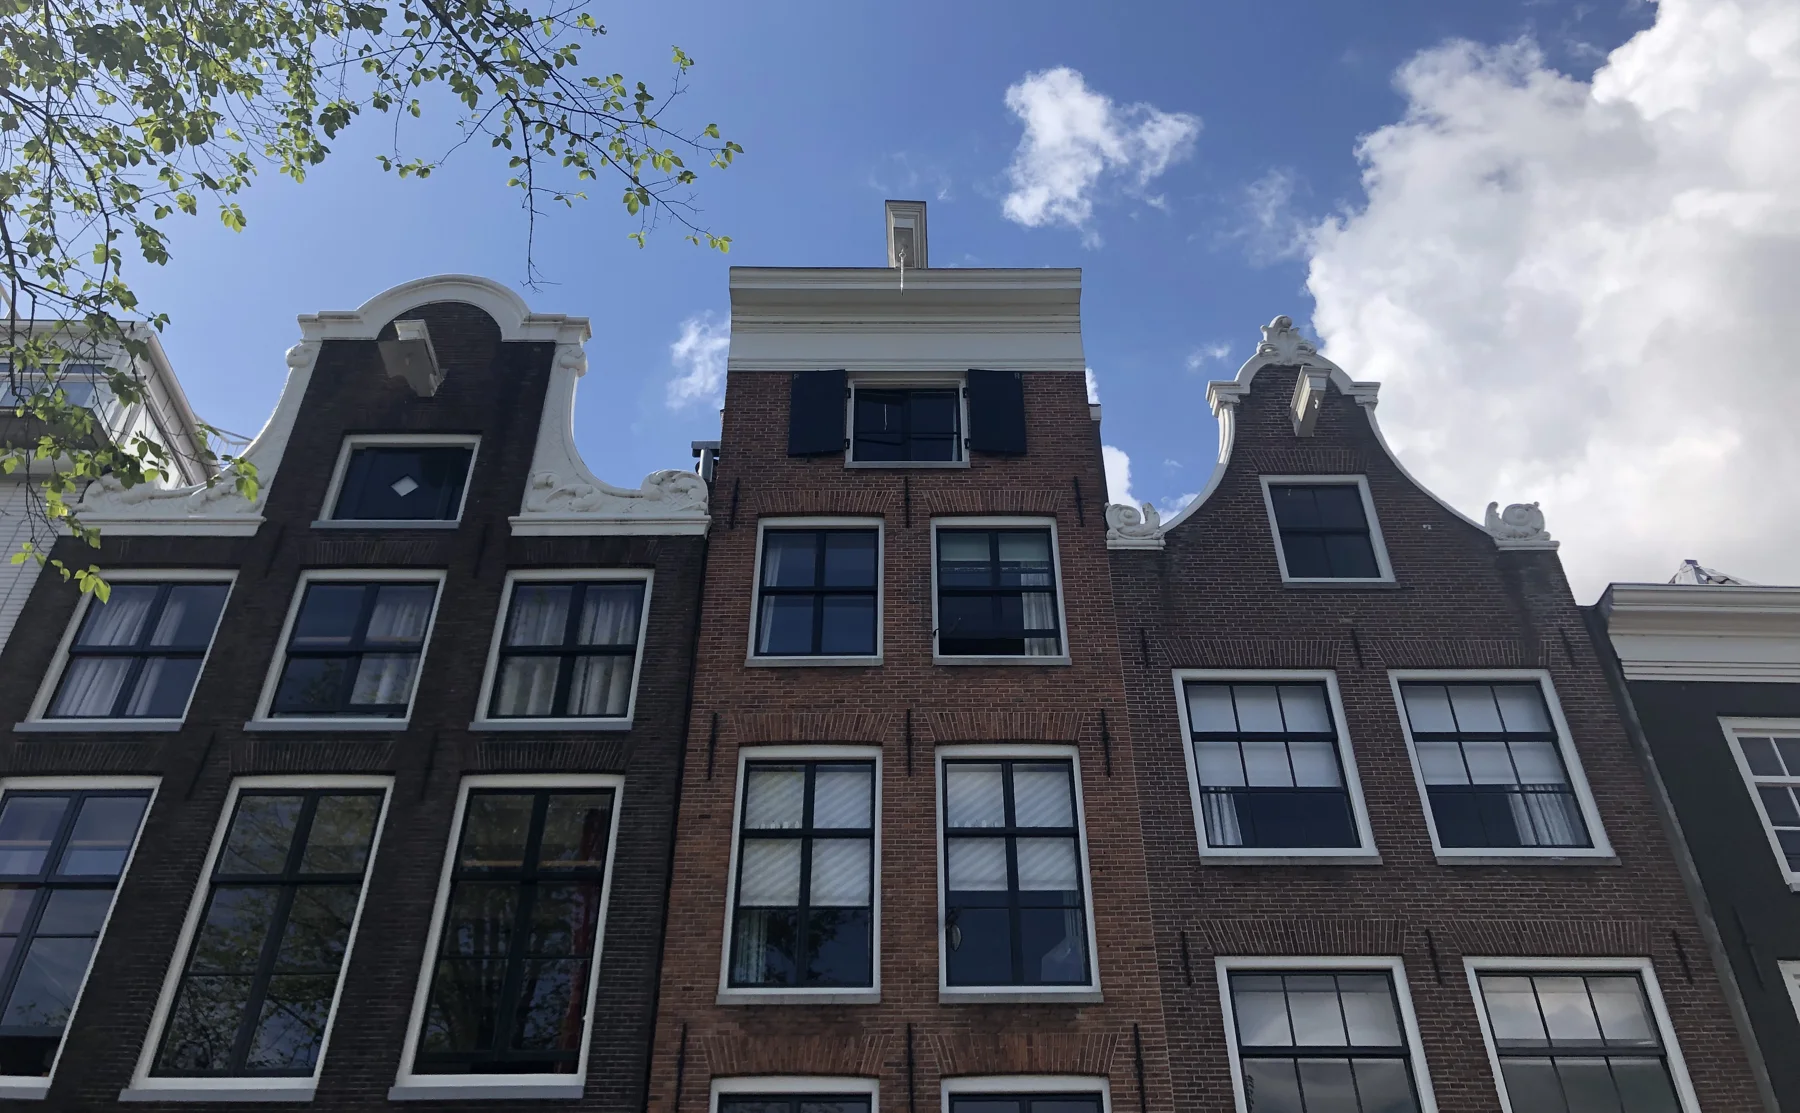 Learn to Make Dutch Pancakes in a Beautiful Amsterdam Canal House - 1442251